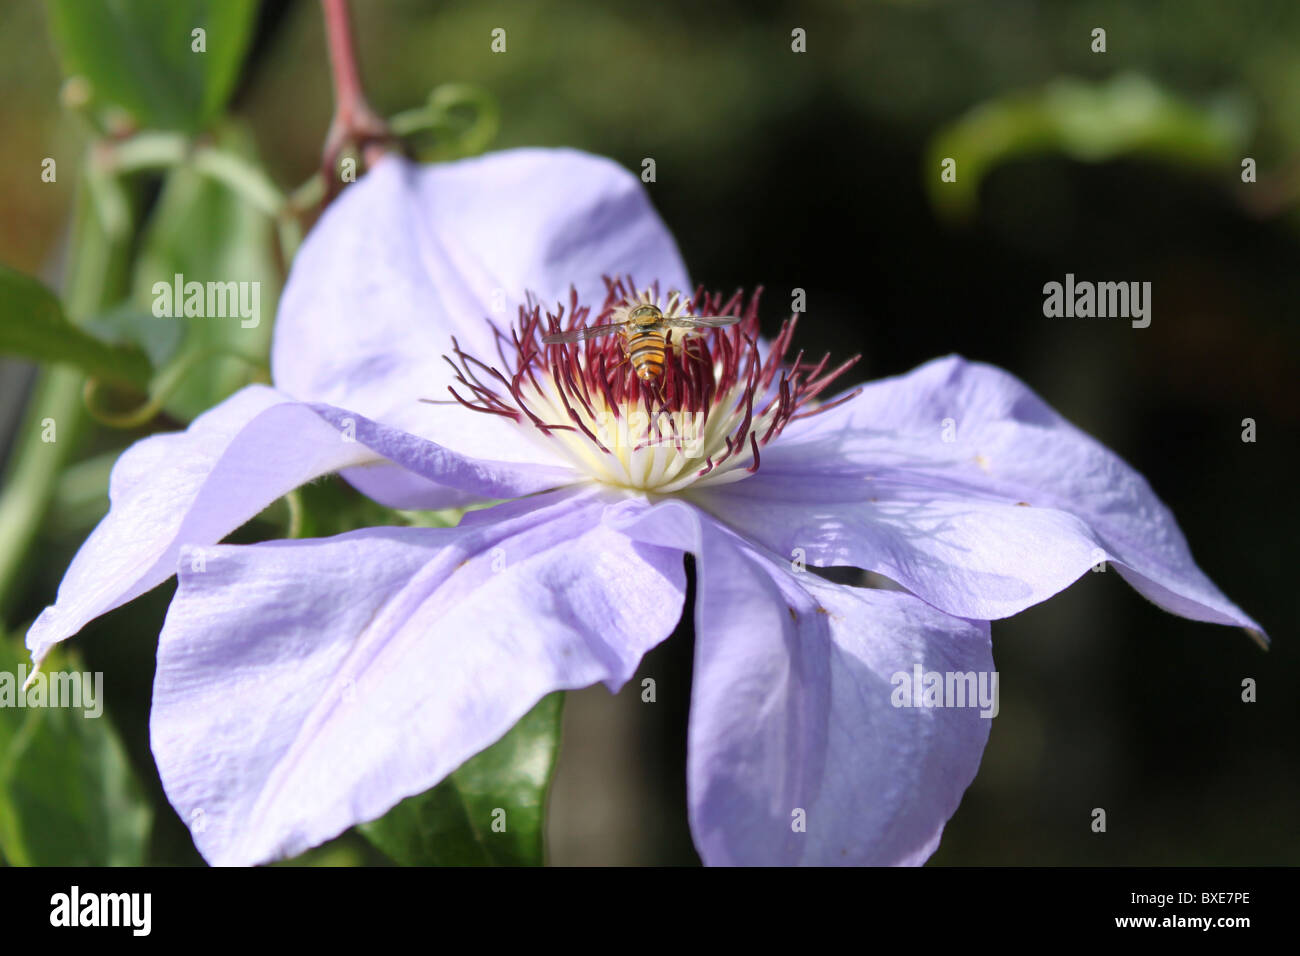 Hoverfly drawing nectar from a clematis flower. Stock Photo